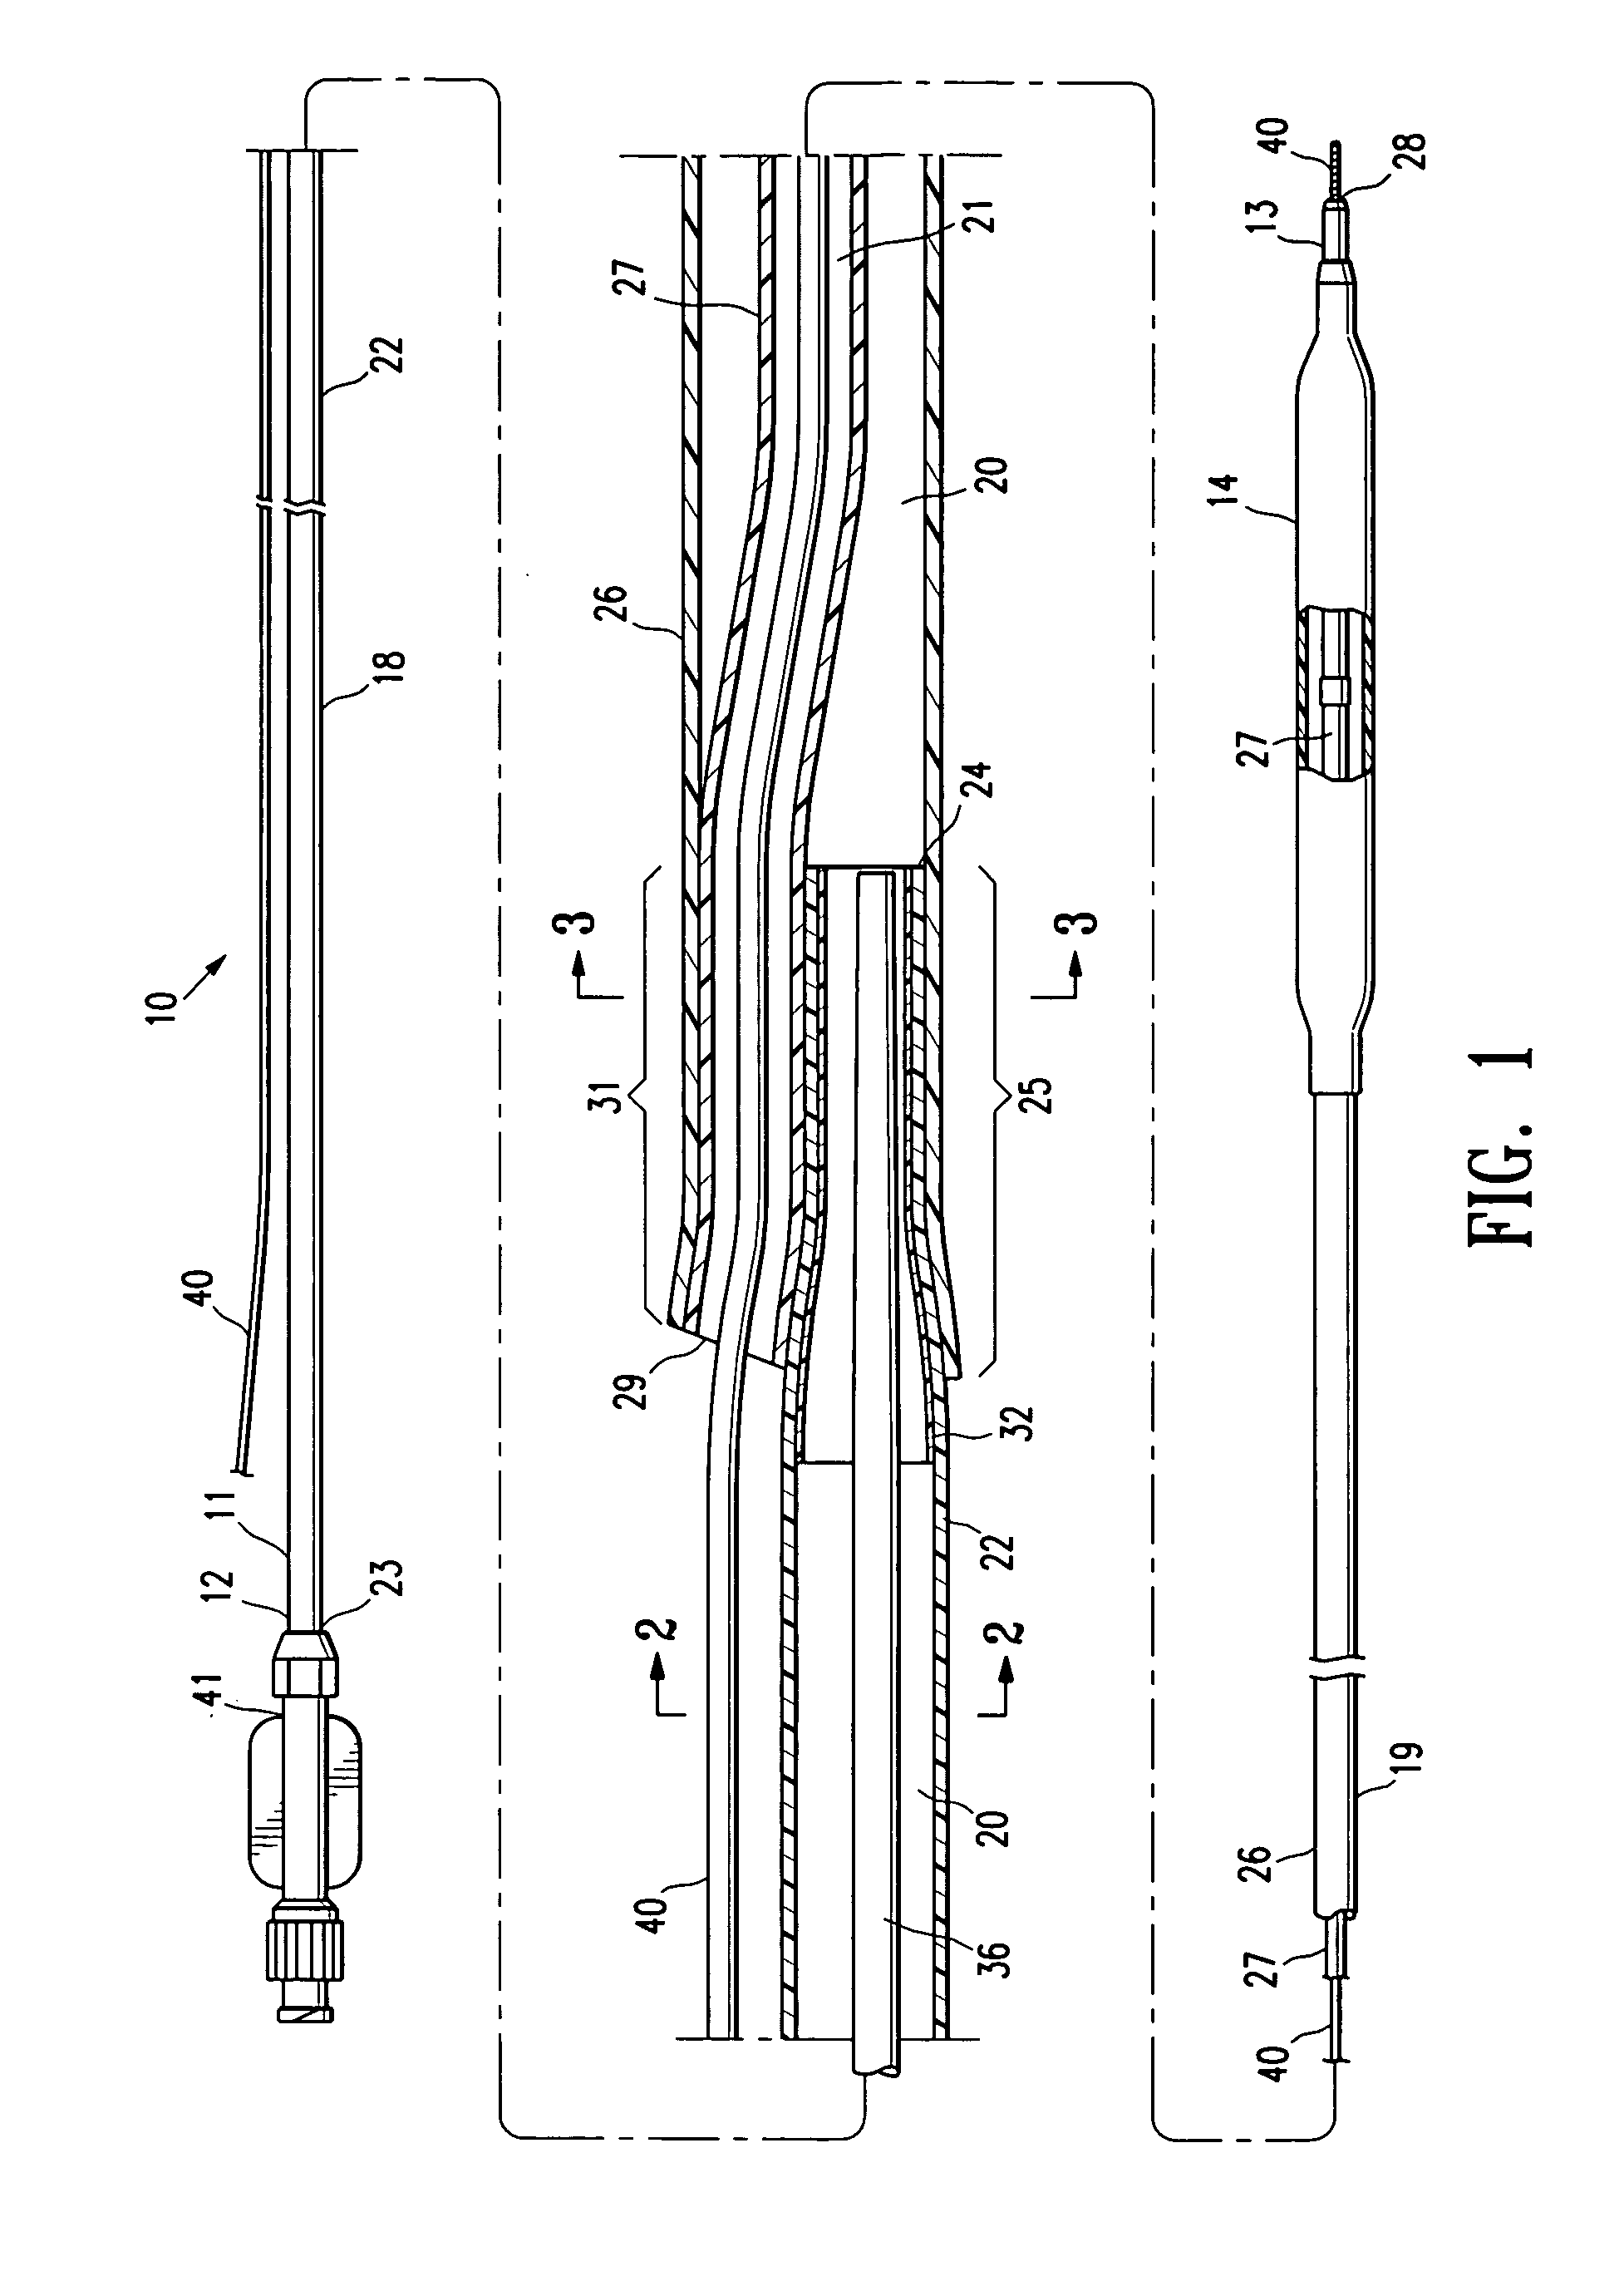 Catheter shaft junction having a polymeric multilayered sleeve with a low processing temperature outer layer